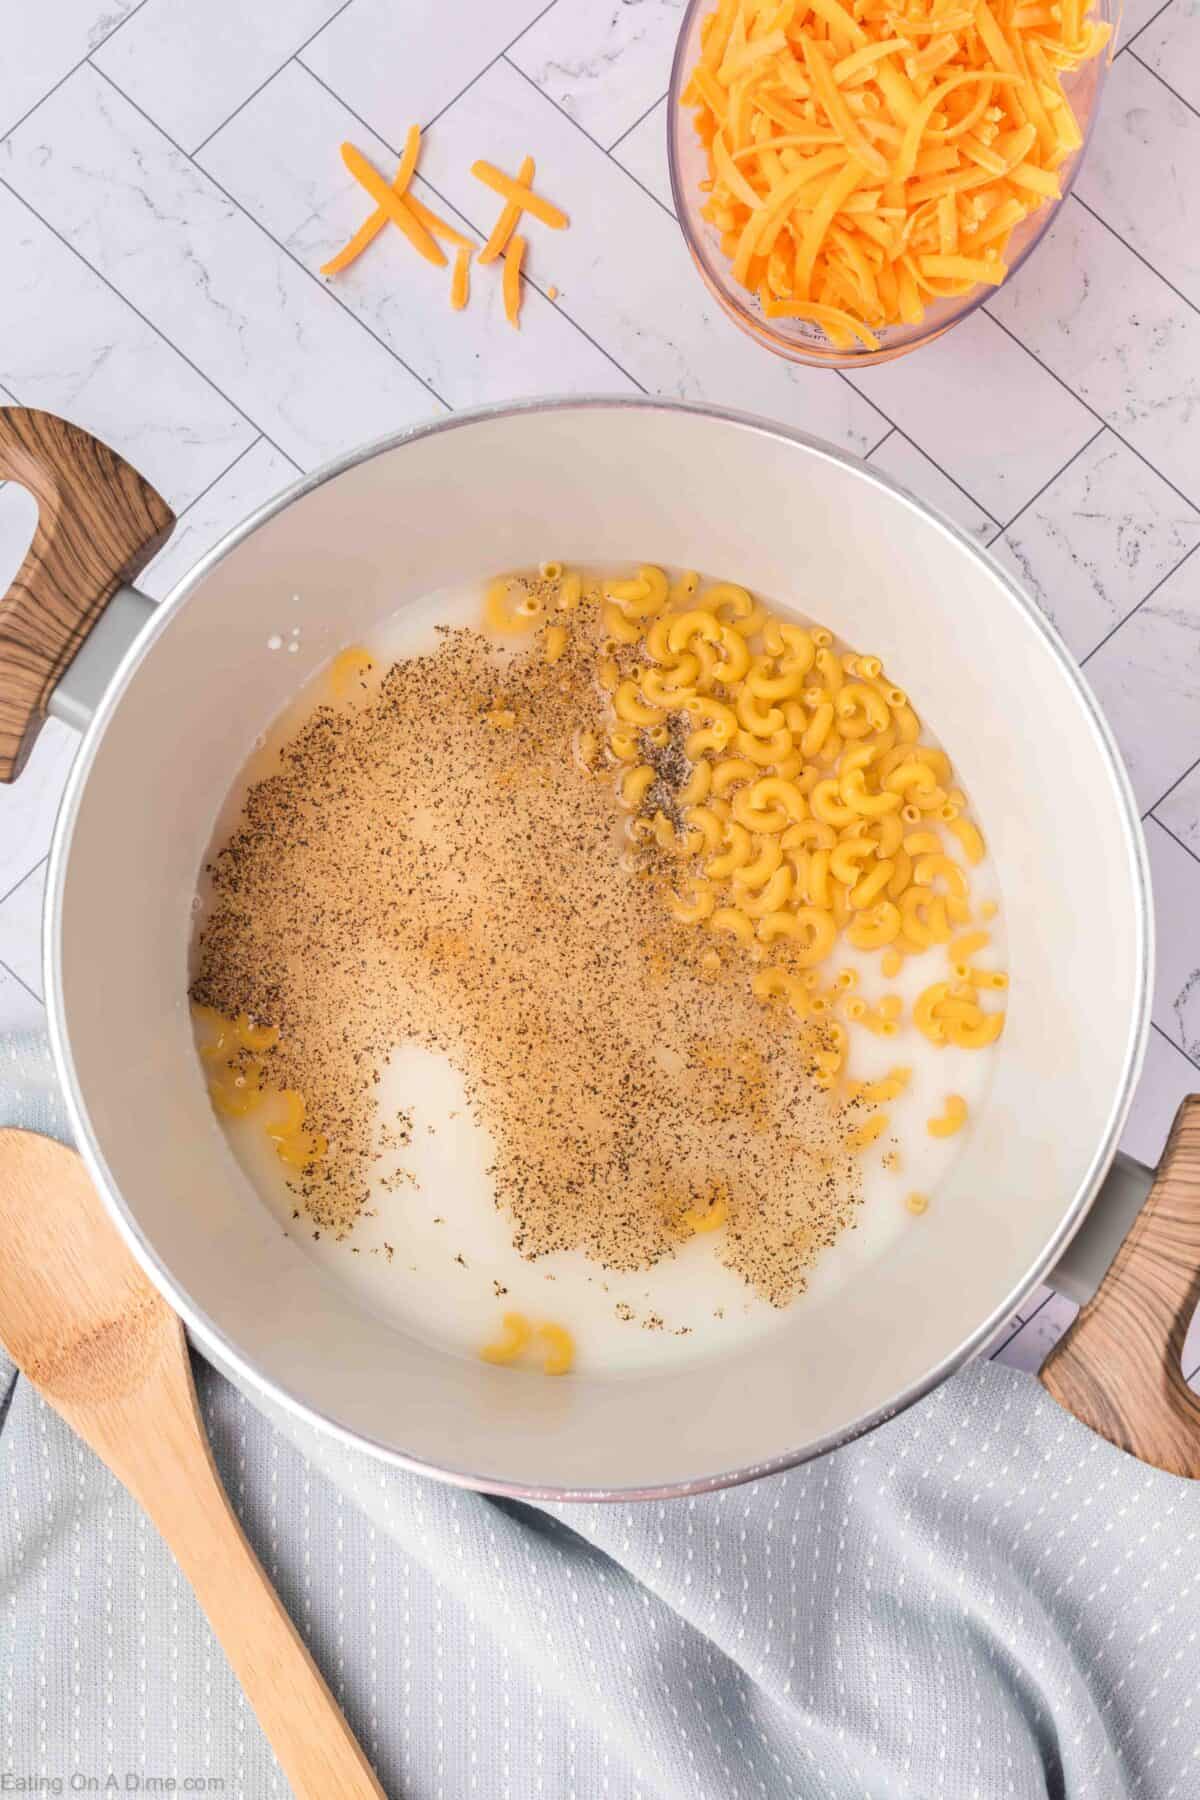 A pot on a white tiled countertop contains milk, elbow macaroni, and black pepper, ready to be cooked. Nearby, a bowl of shredded cheddar cheese and a wooden spoon await the next steps in this easy homemade macaroni and cheese recipe, with a gray cloth napkin completing the setup.